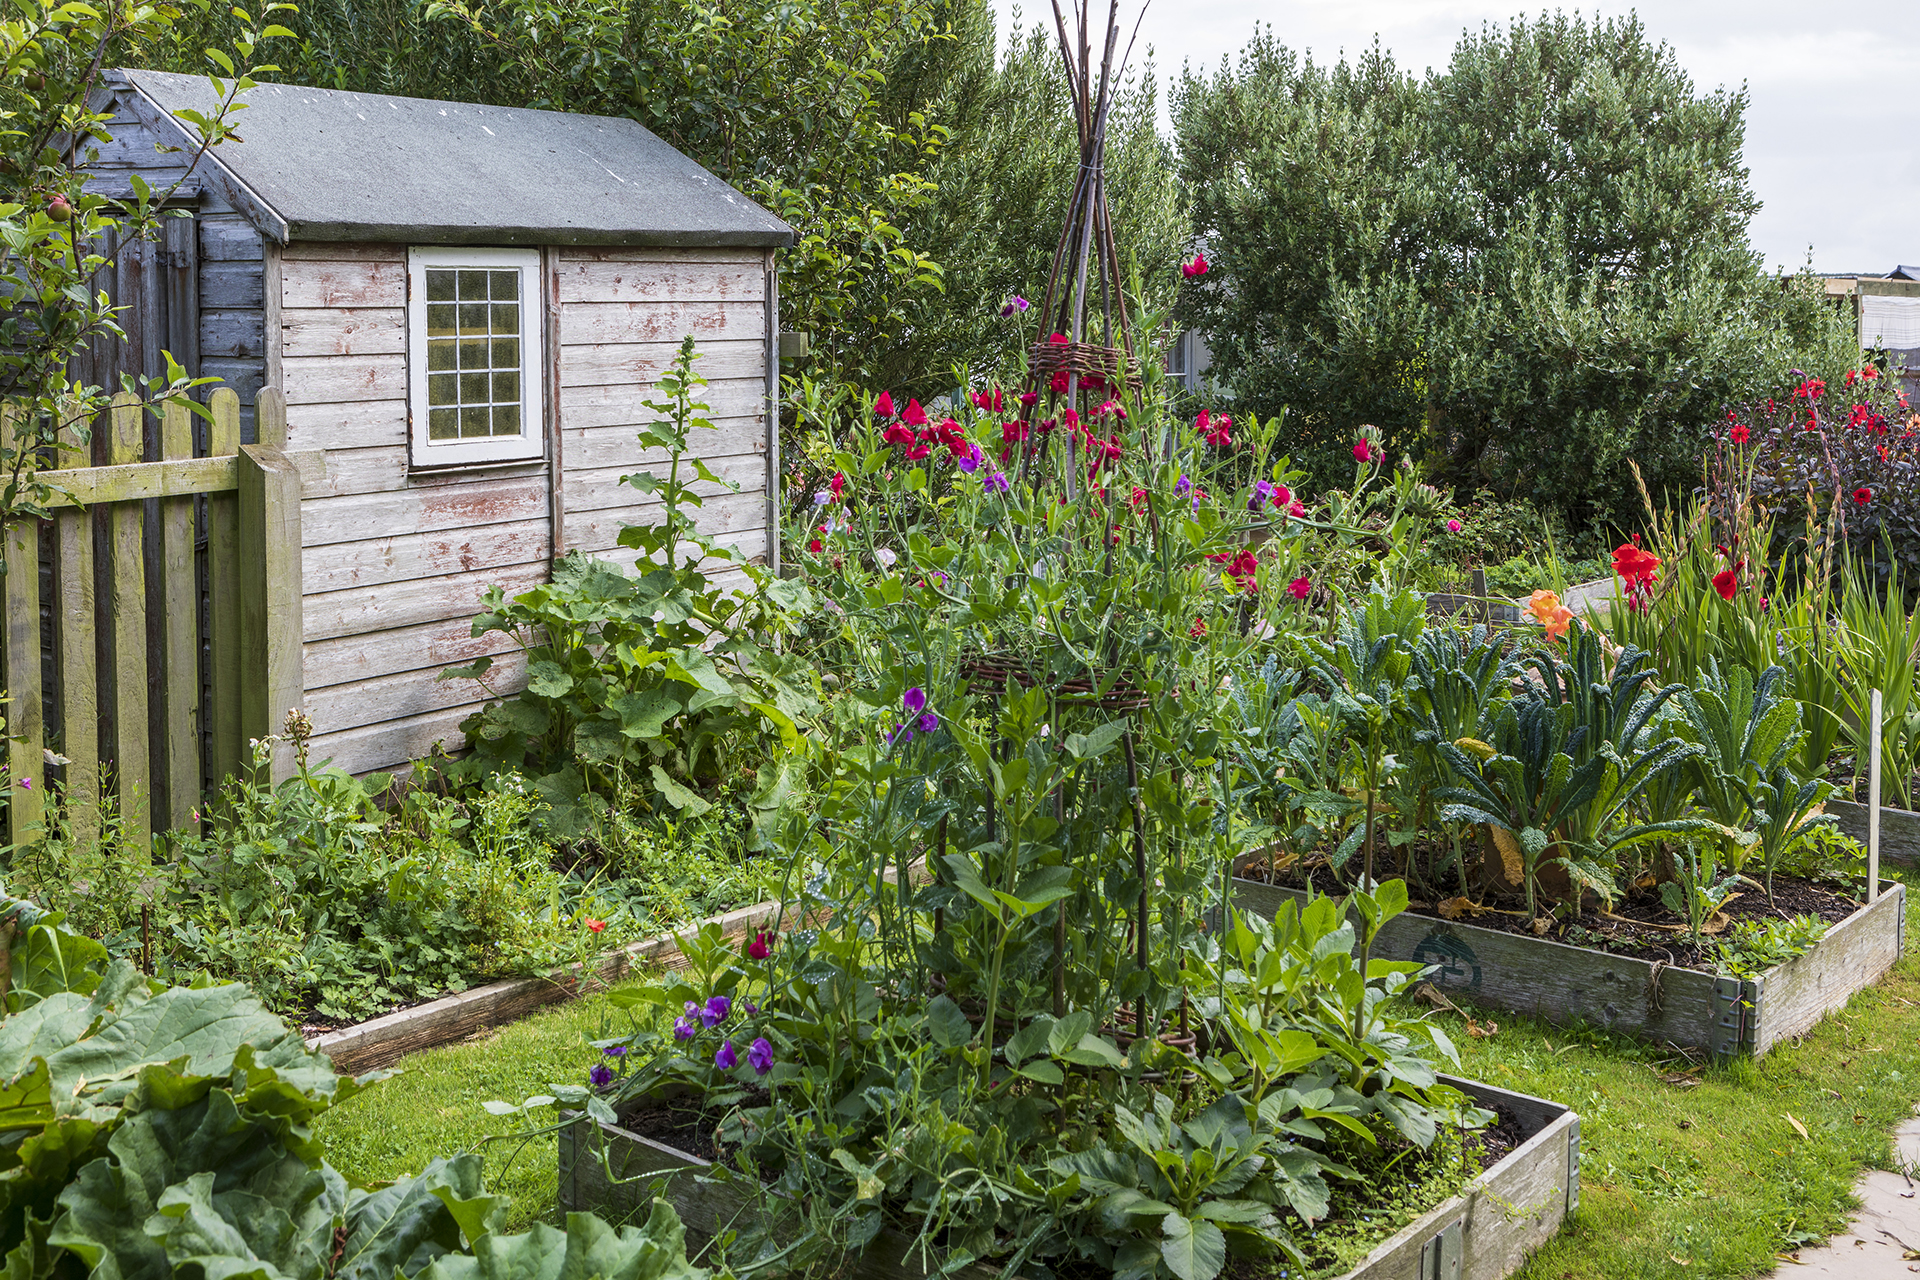 How to Plant a Raised Bed Garden That Avoids 8 Common Mistakes